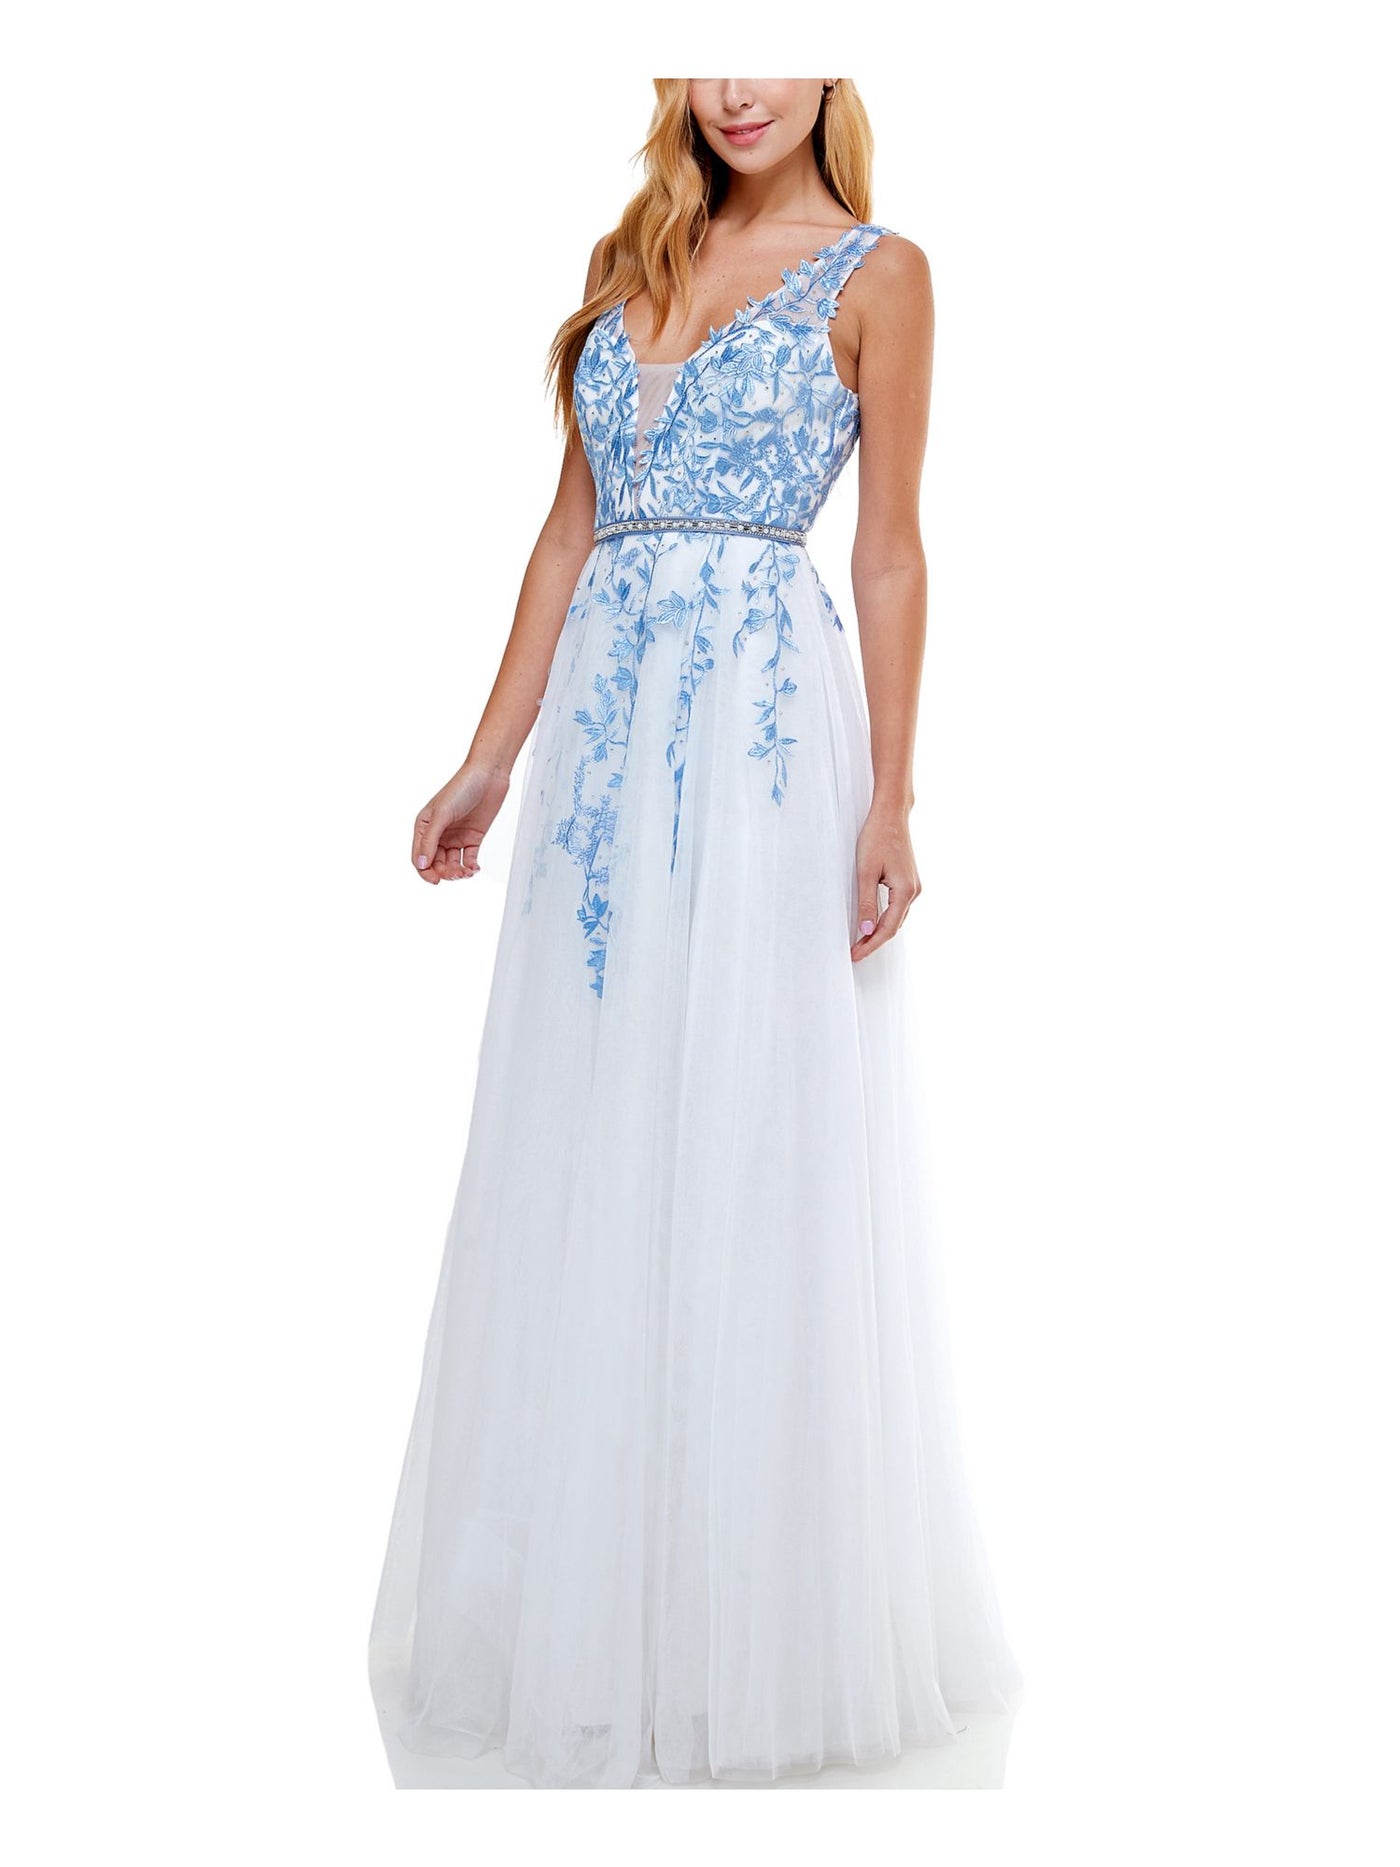 SAY YES TO THE PROM Womens White Embellished Mesh Gown Sleeveless V Neck Full-Length Formal Fit + Flare Dress Juniors 11